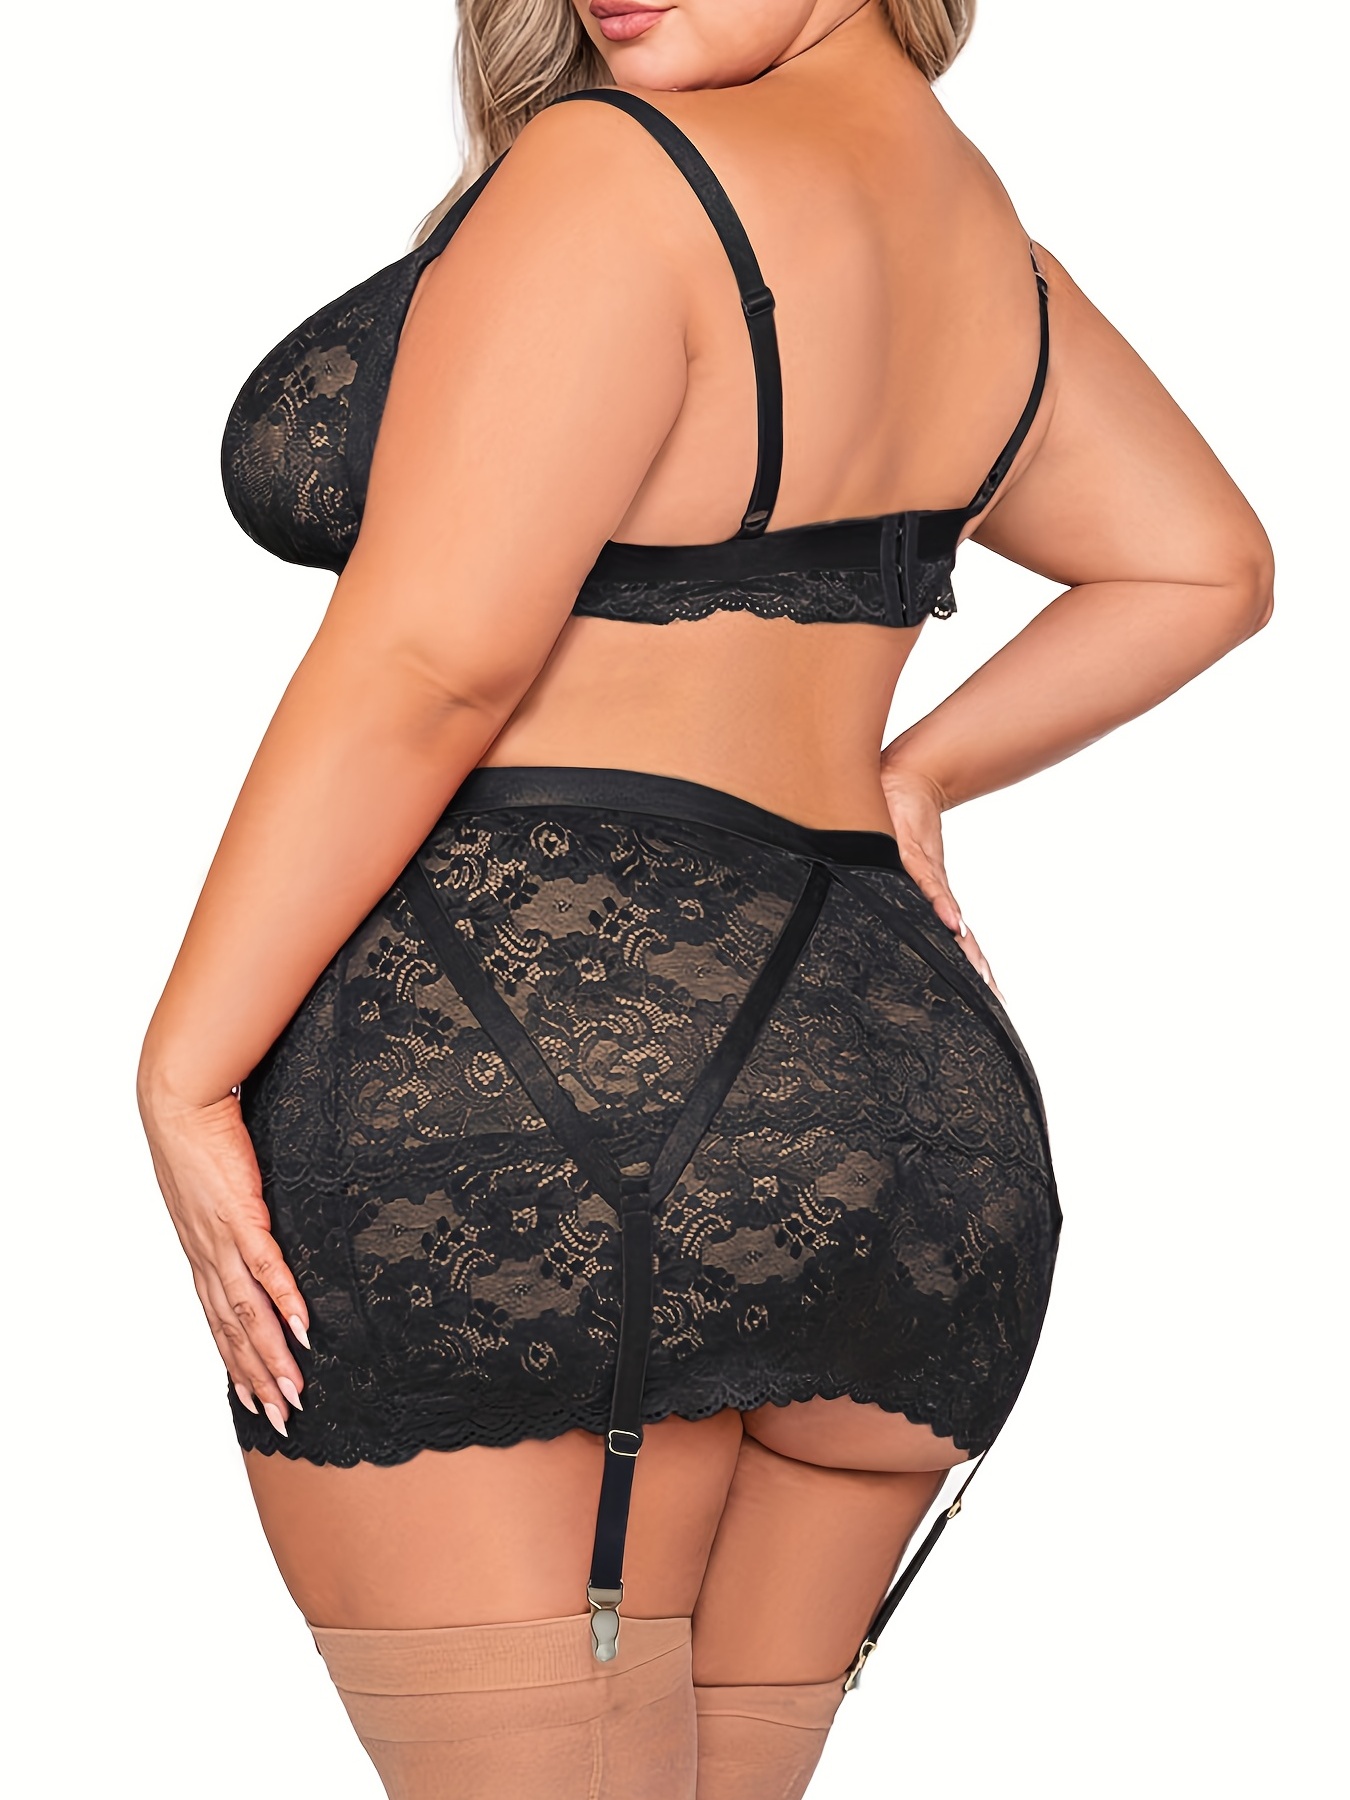  Sexy Lingerie for Women Naughty Women V Neck Lacey